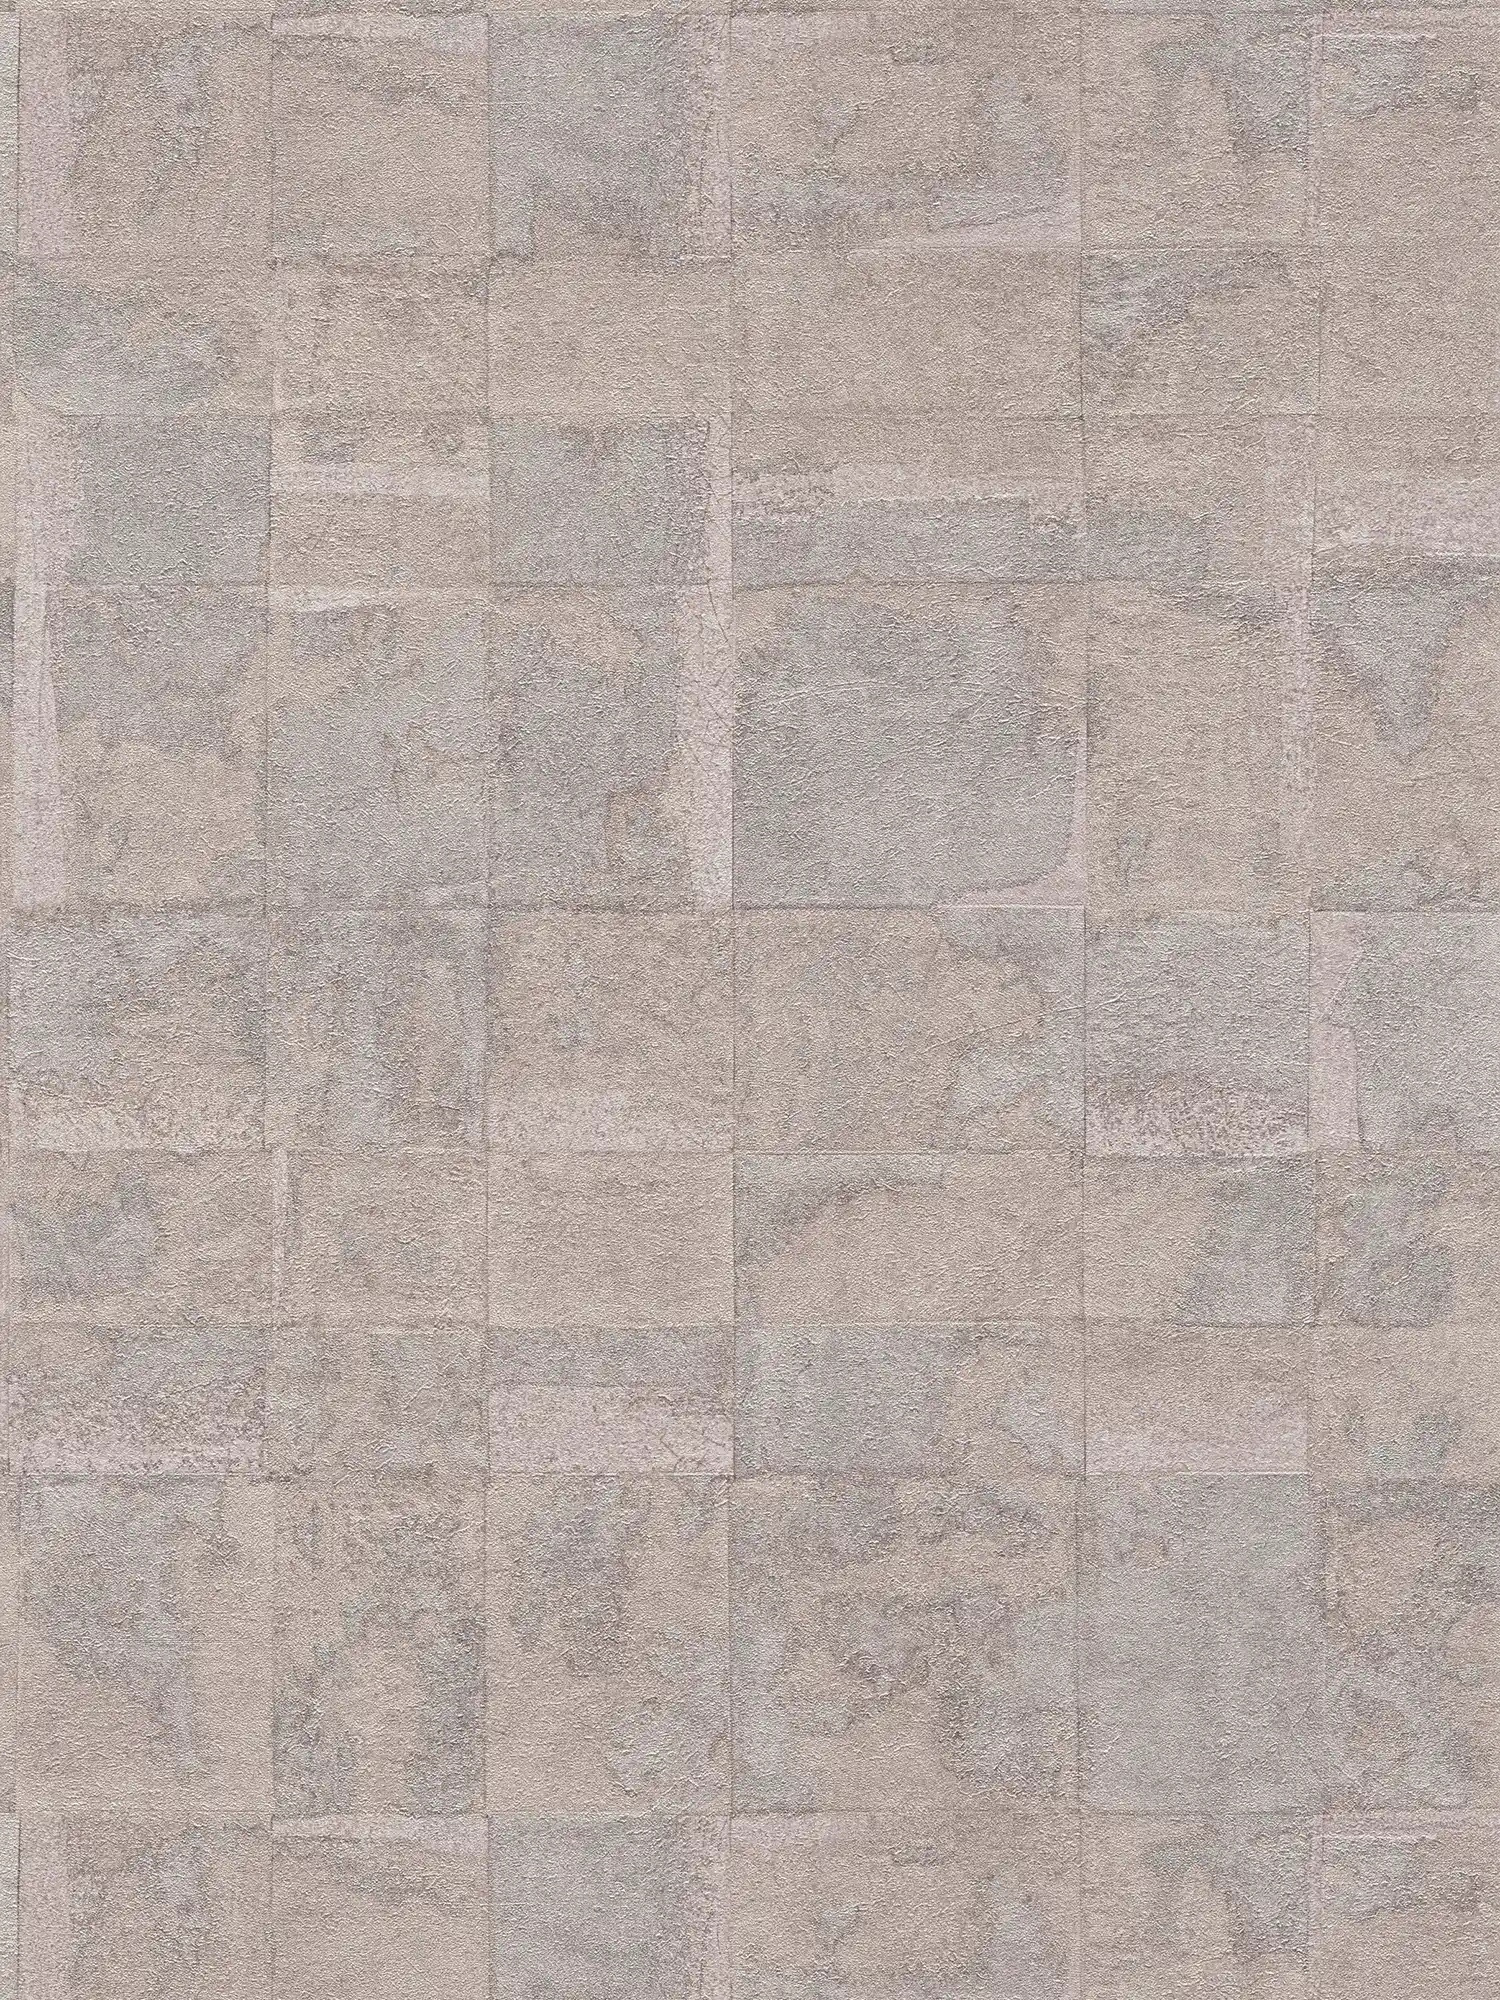             Non-woven wallpaper with tile pattern and patina effect - beige, grey
        